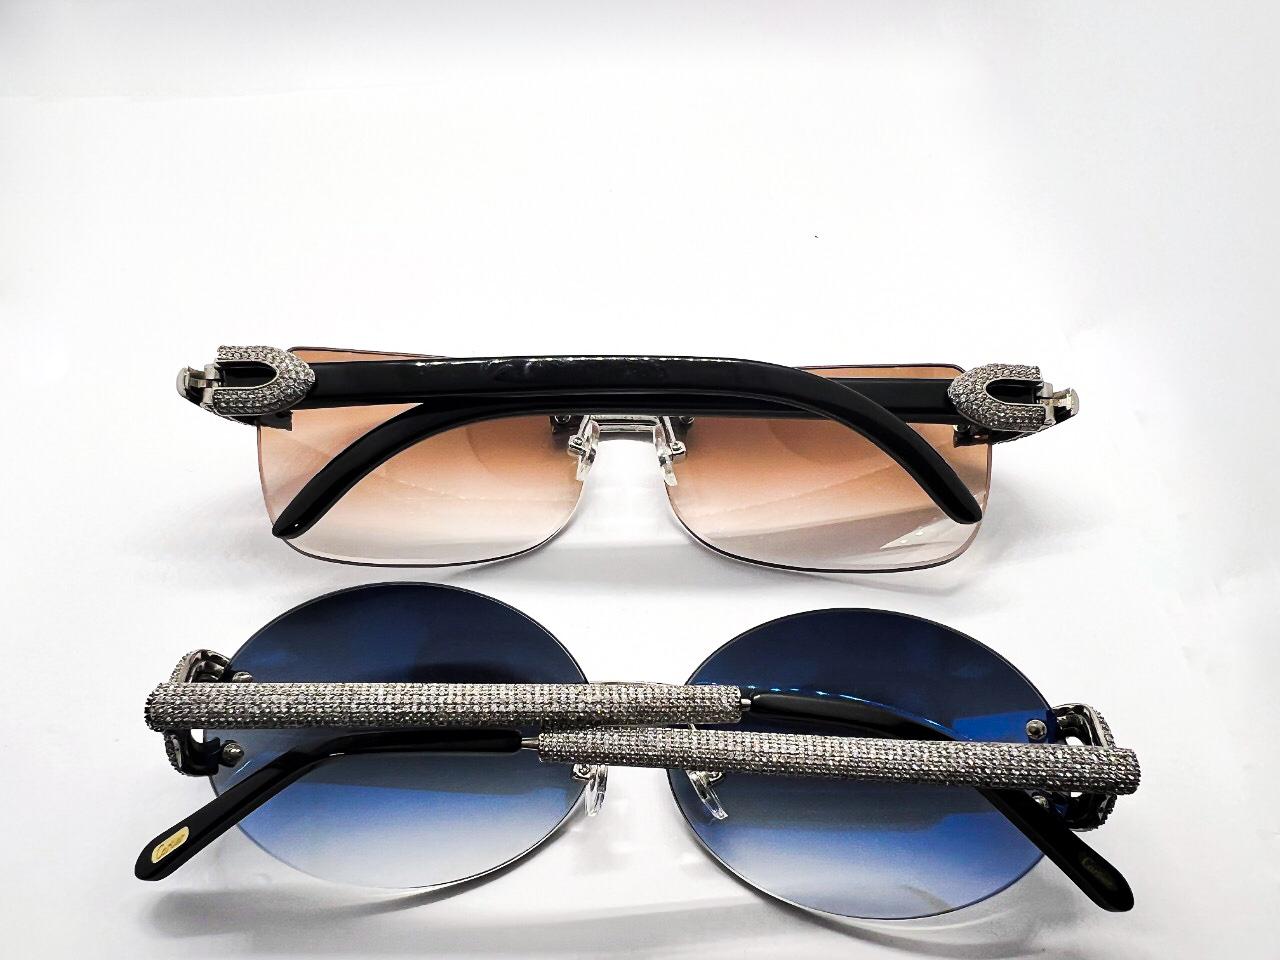 Bubble Set Combo (2 pair) - Custom Wire and Black Horn Sunglasses